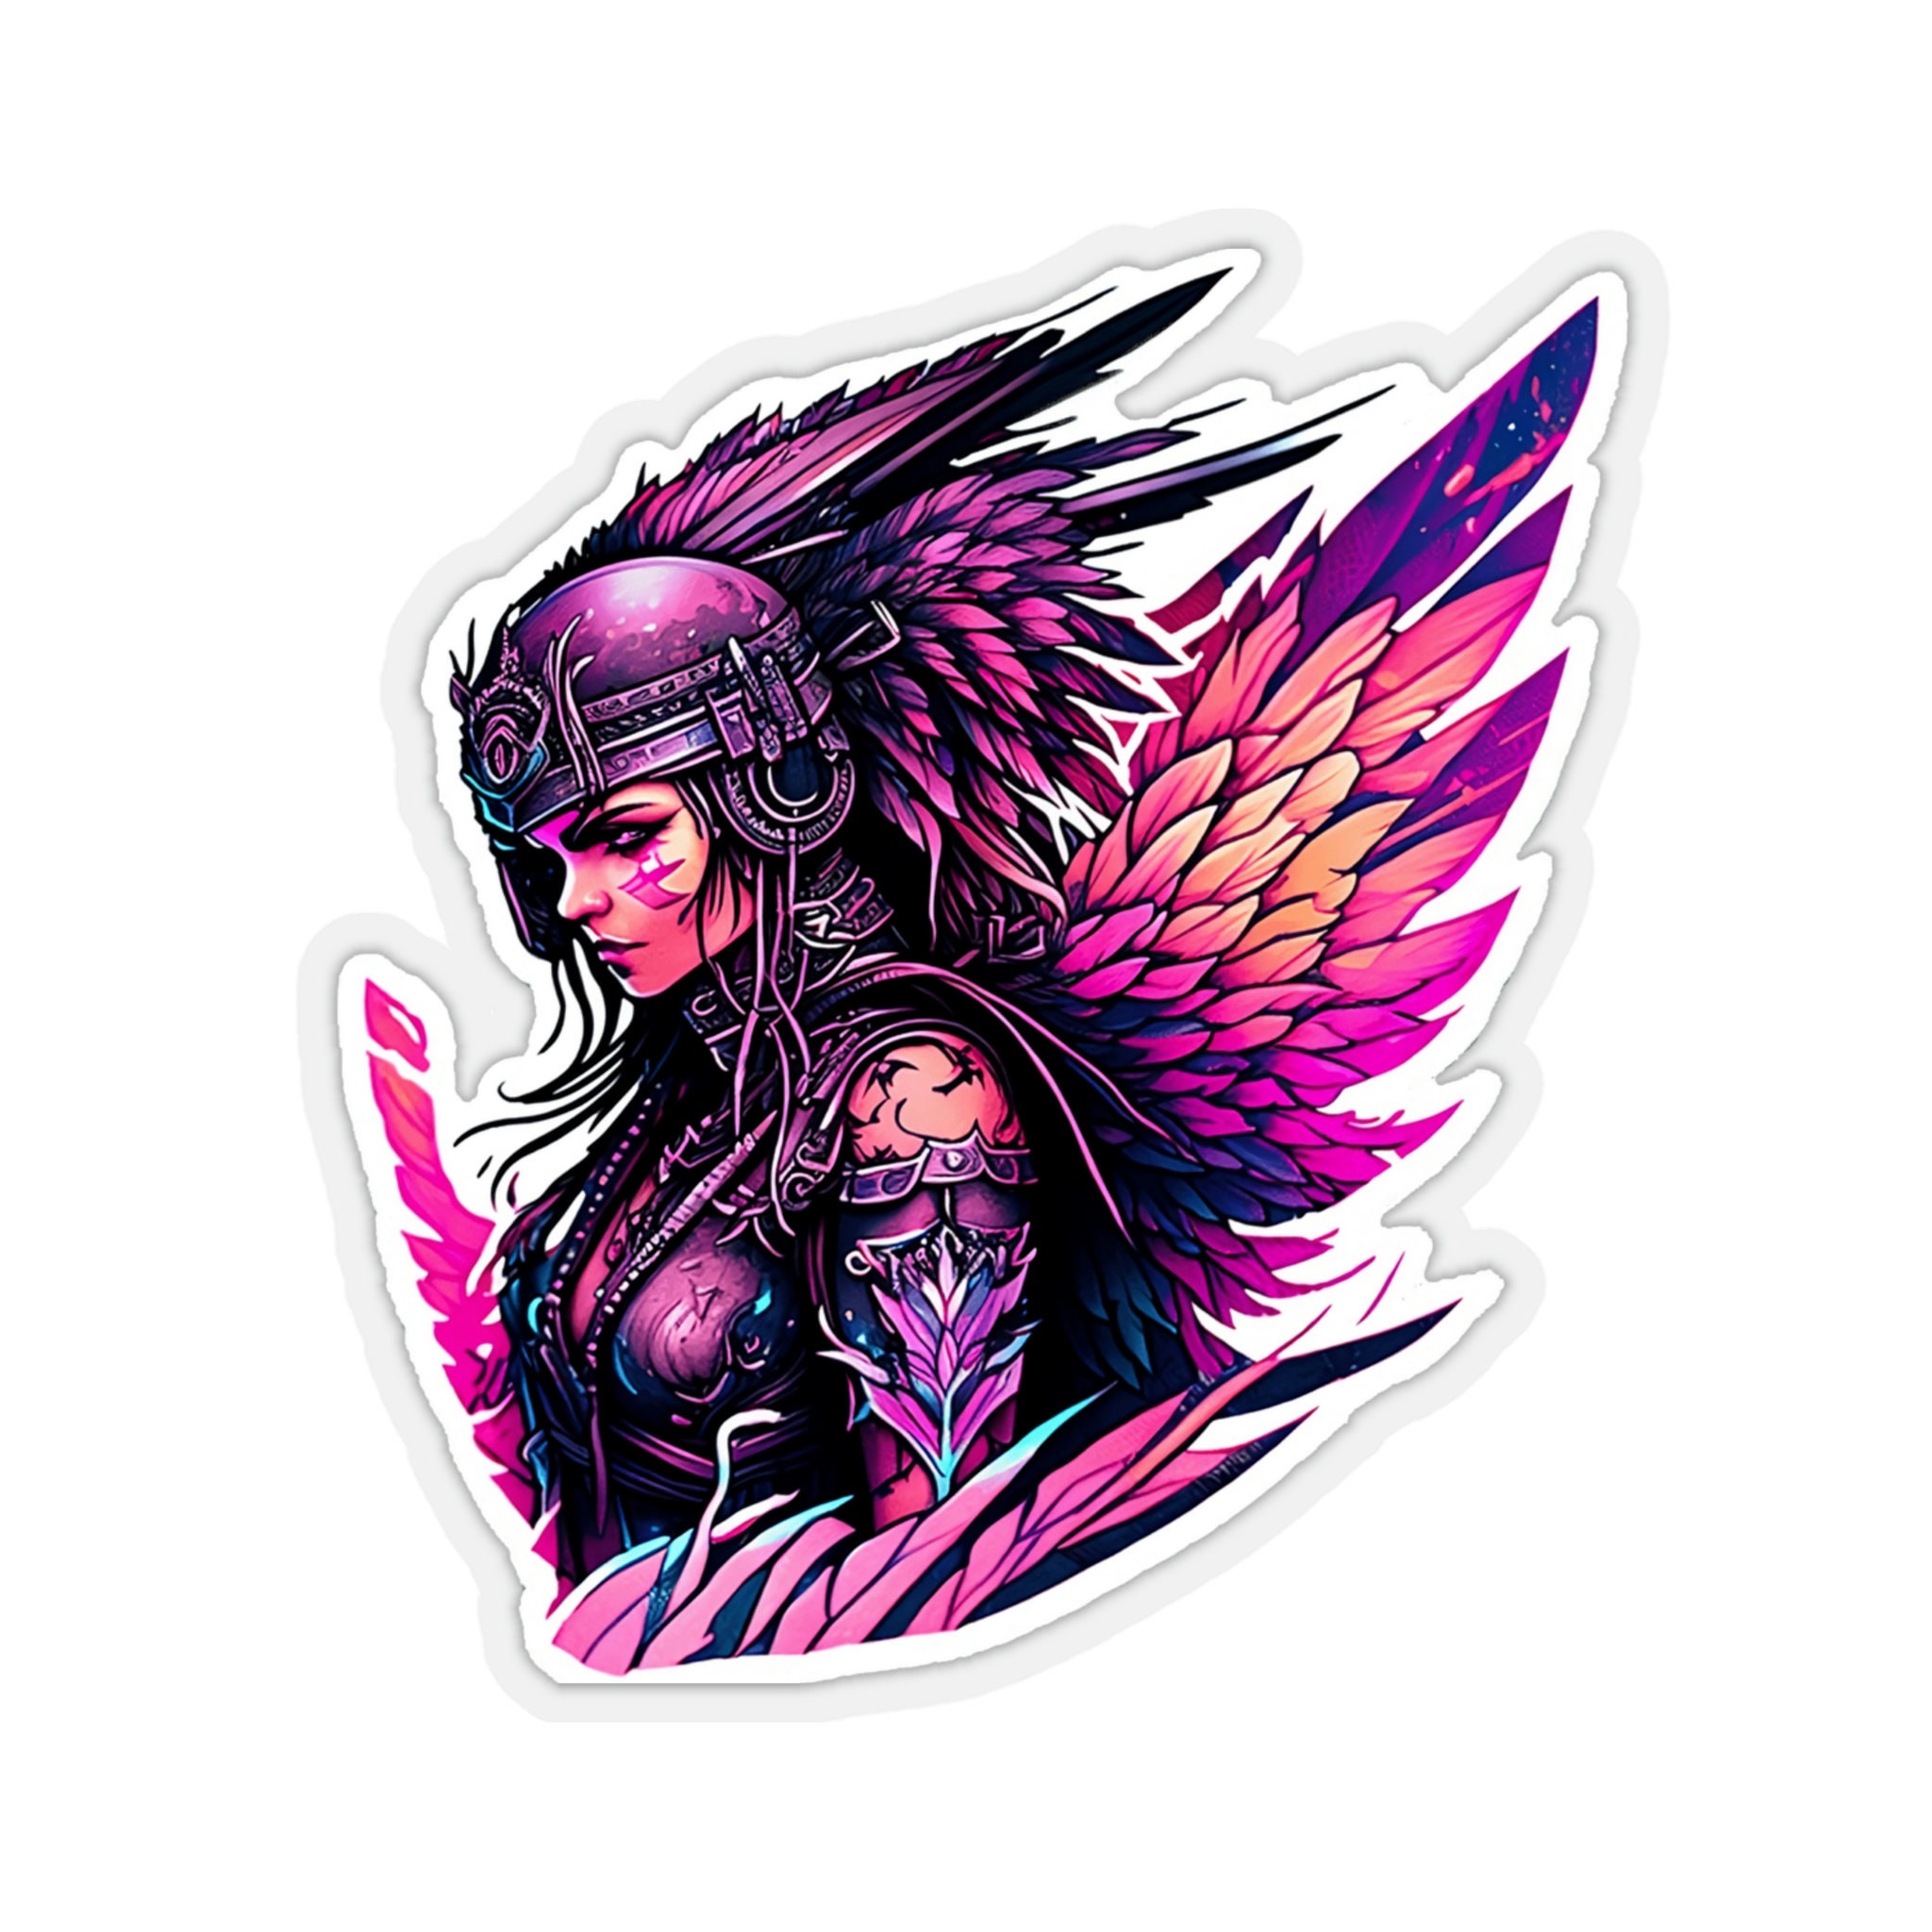 Valkyrie Profile, Unique Kiss Cut Sticker Designs Stand Out With